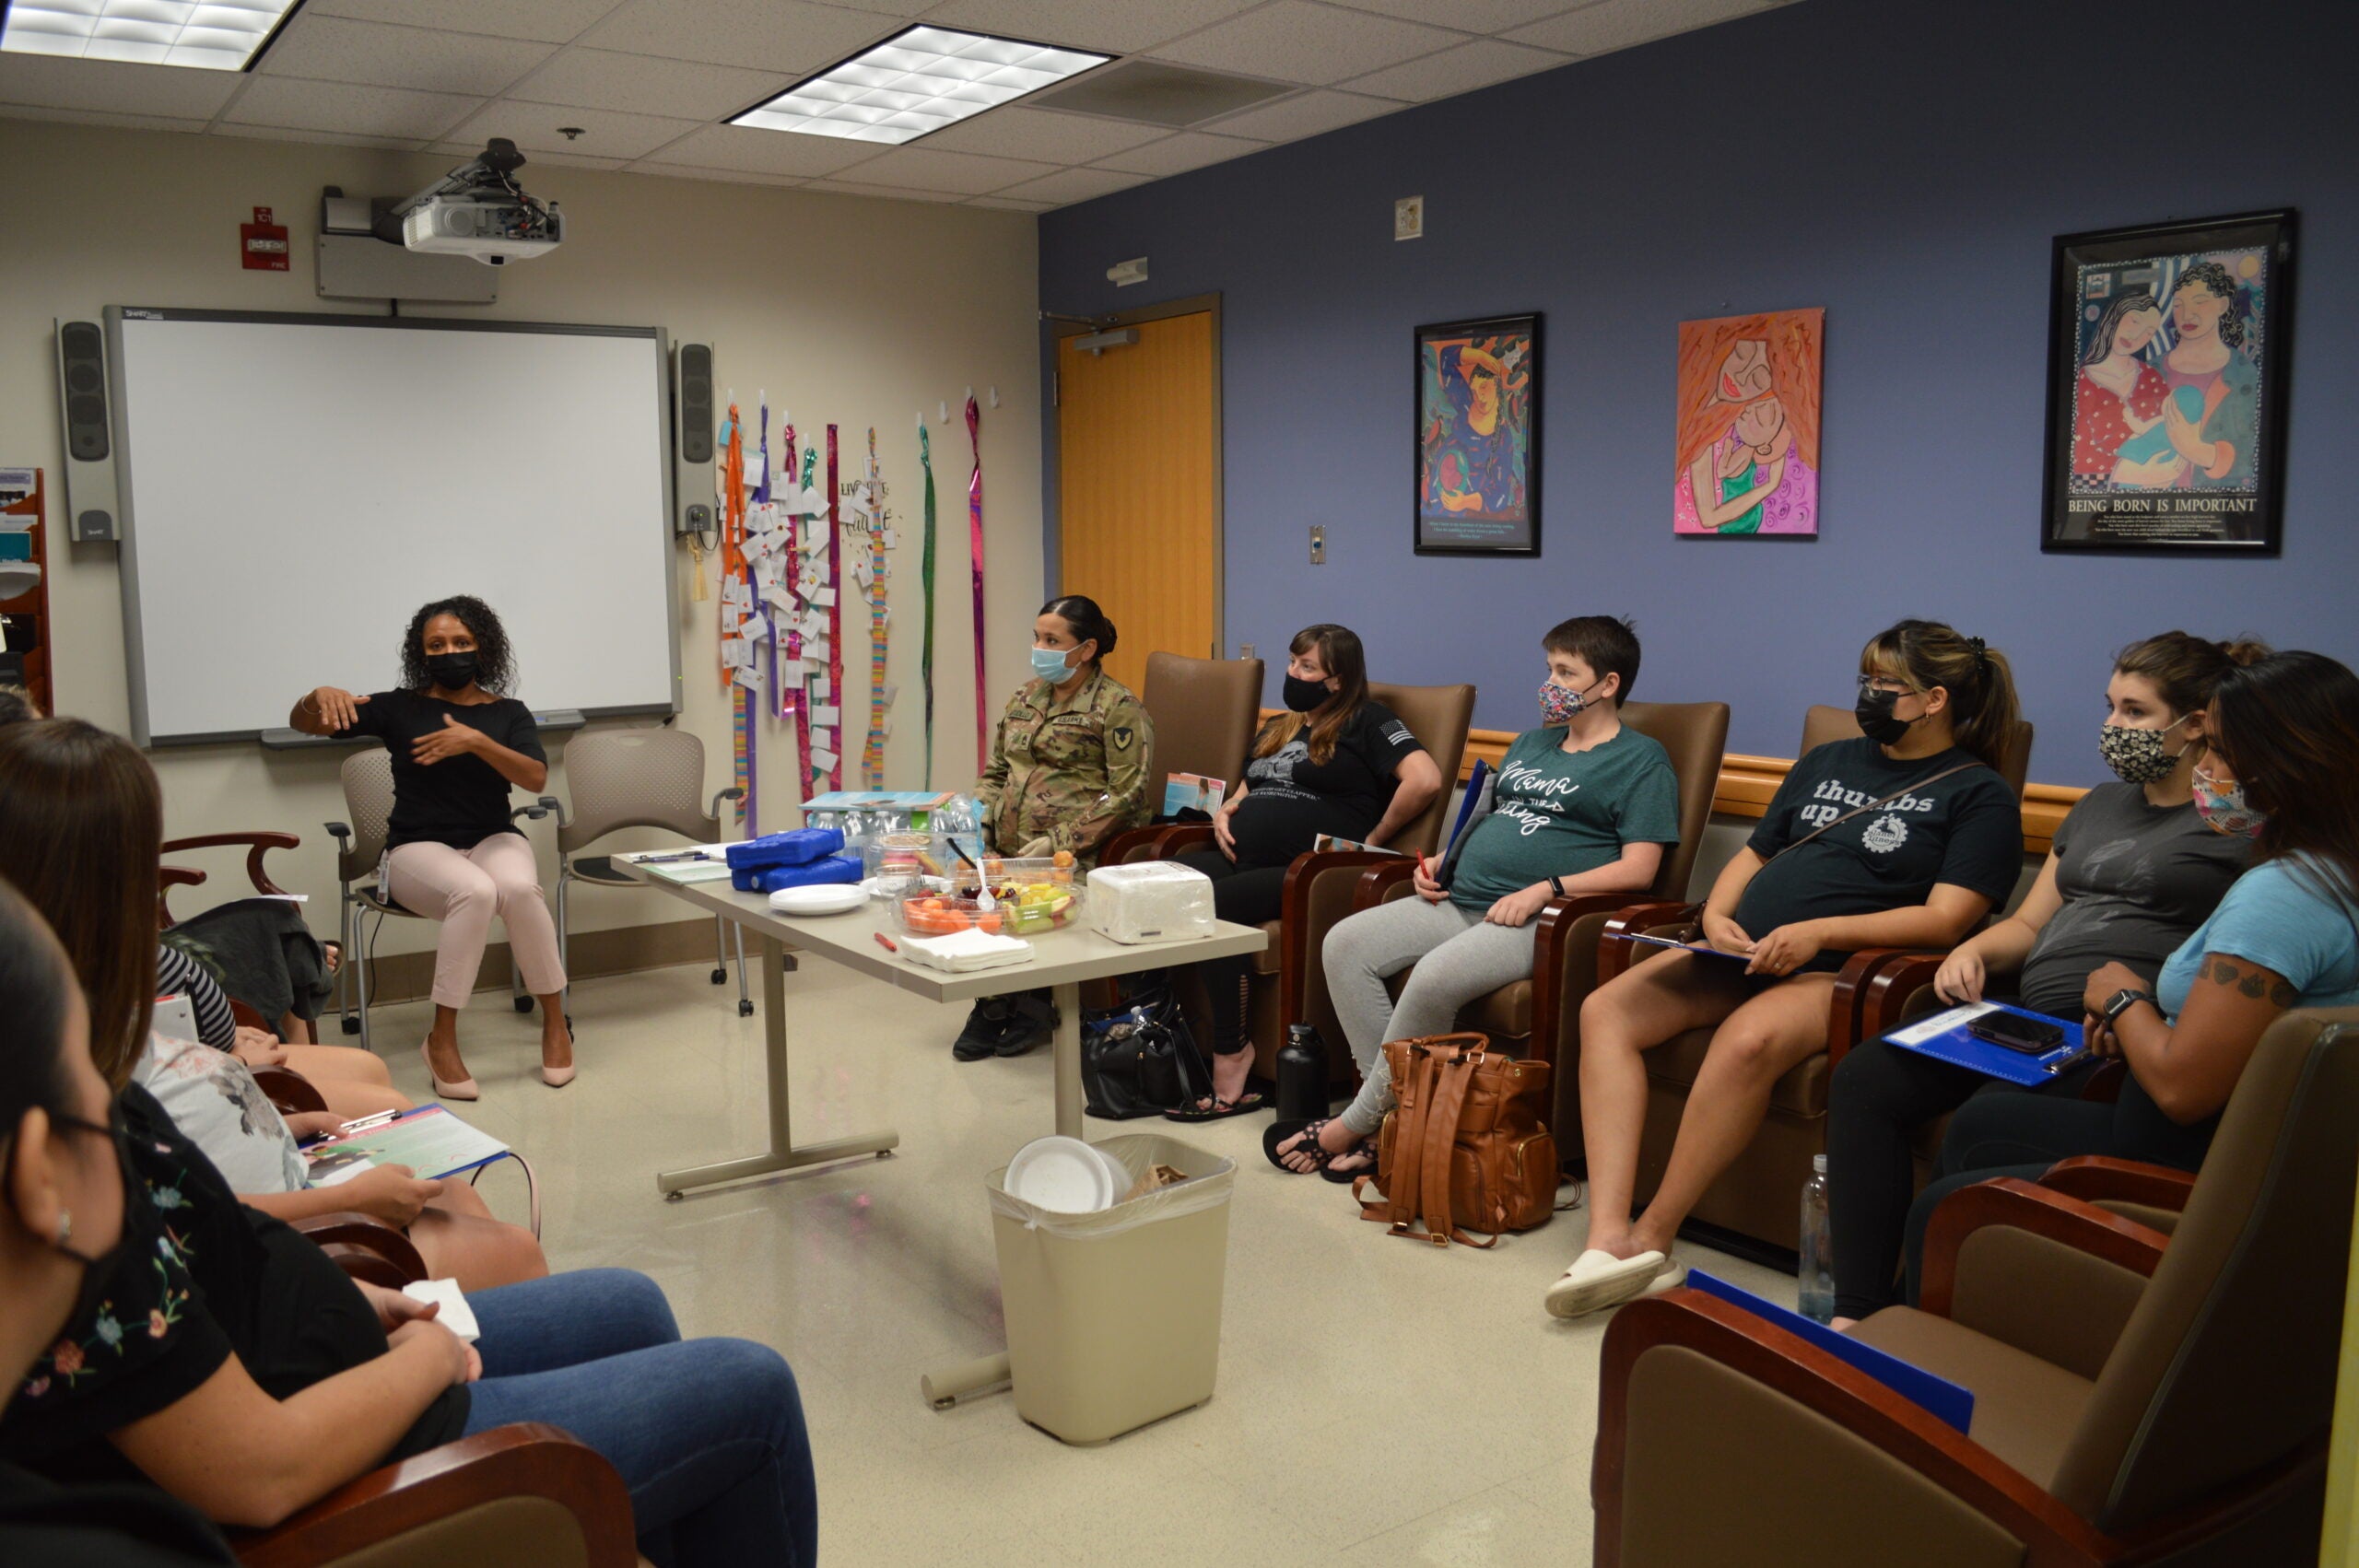 Virginia Monteiro-Walker, certified nurse midwife, leads a discussion during a pregnancy group at Brooke Army Medical Center, Joint Base San Antonio-Fort Sam Houston, Texas, May 16, 2022. Group prenatal care models are designed to improve patient education and include opportunities for social support while maintaining the risk screening and physical assessment of individual prenatal care. (U.S. Army Photo by Lori Newman)